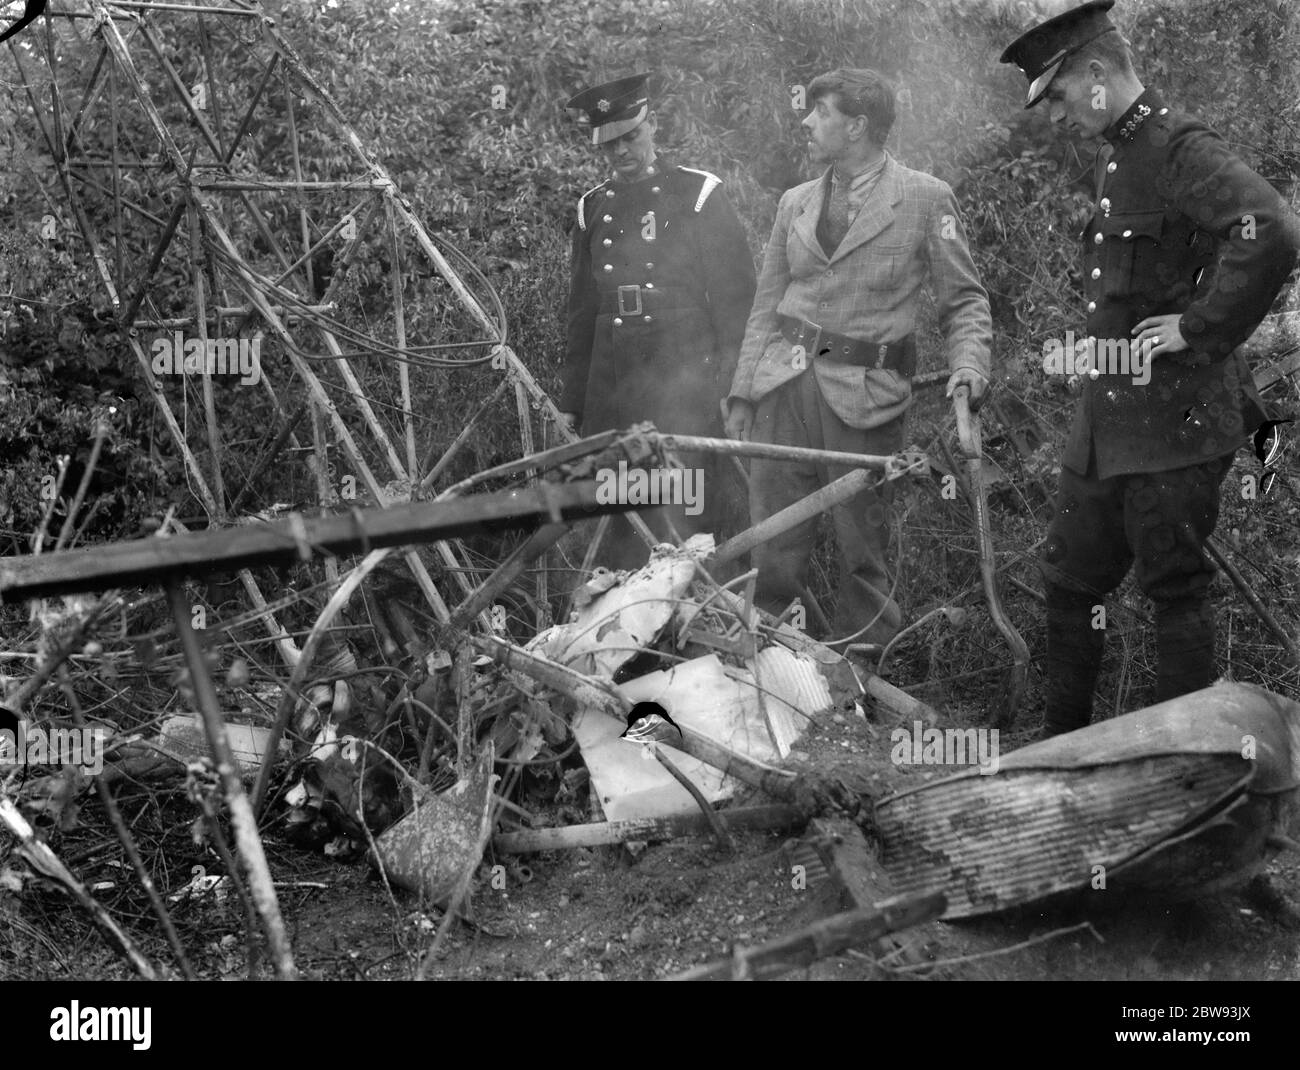 The skeletal remains of a de Havilland Tiger Moth , which crashed near Wilmington , Kent . Only the frame of the aircraft is left behind following the crash . 1939 Stock Photo